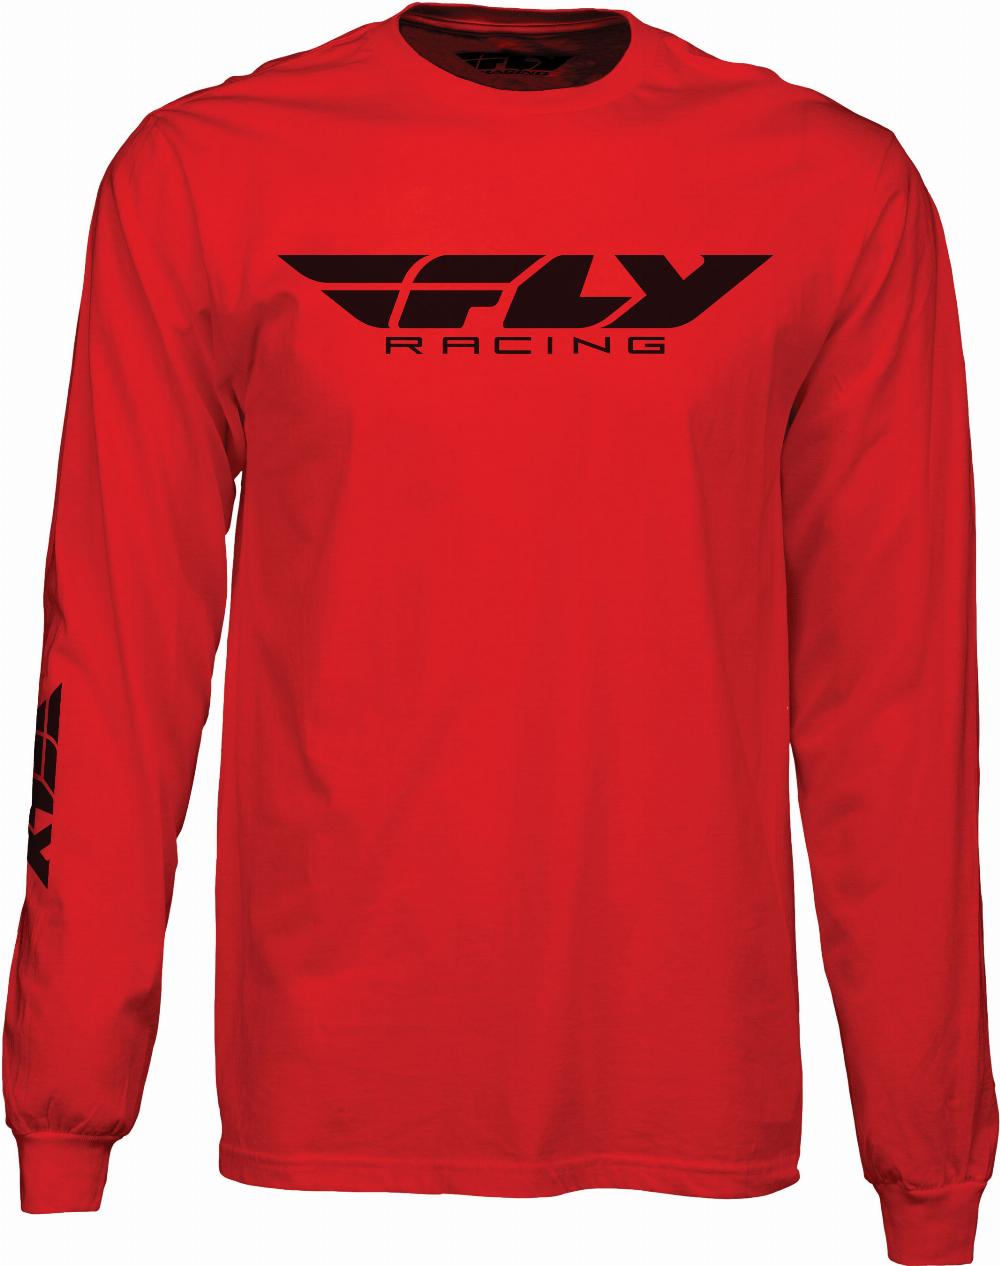 FLY CORPORATE L/S TEE RED SM#mpn_352-4148S